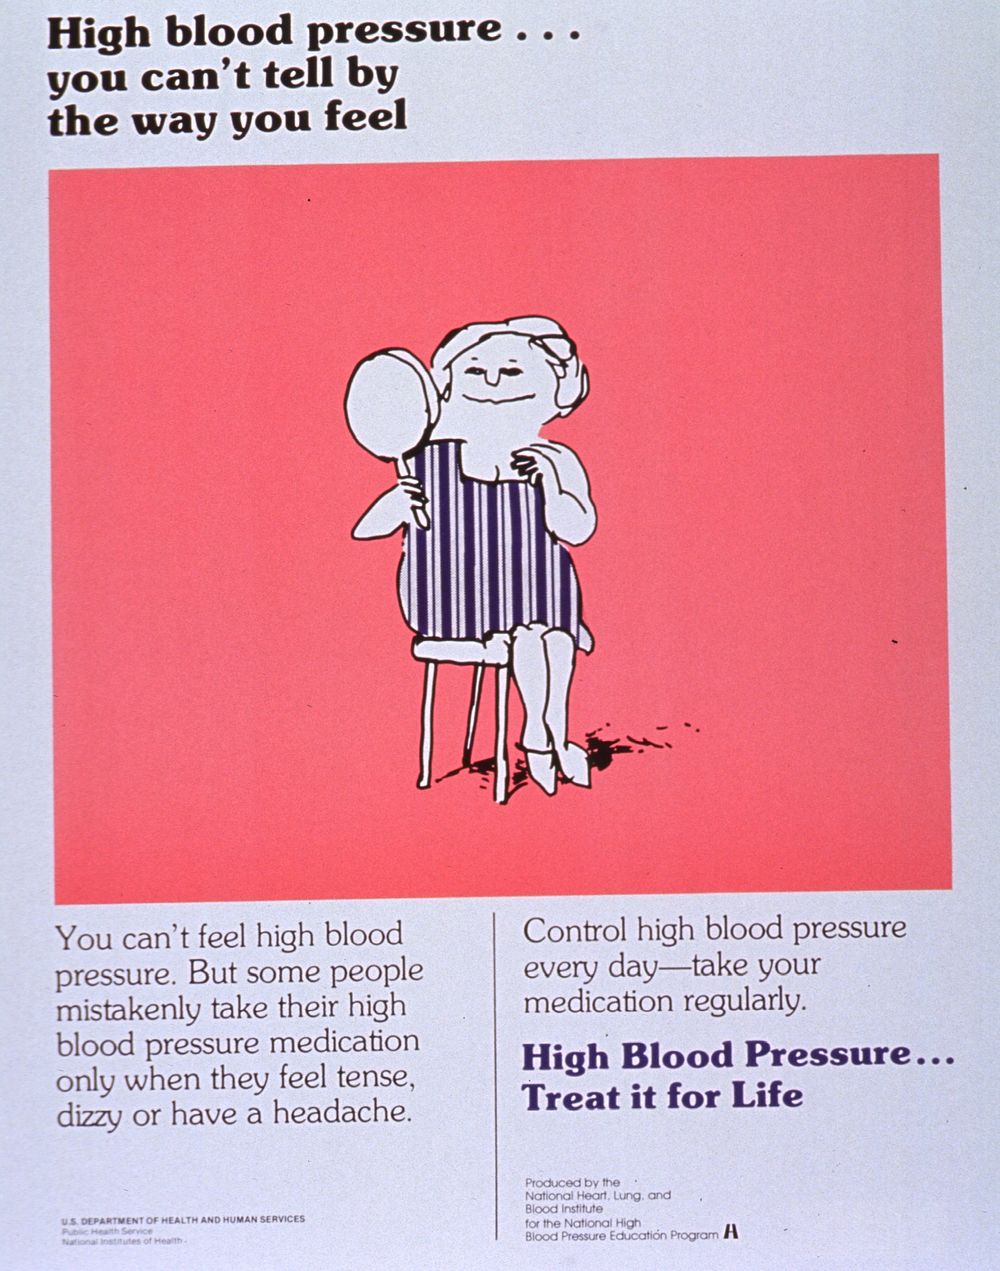 High blood Pressure--: You Can't Tell By the Way You Feel. Original public domain image from Flickr